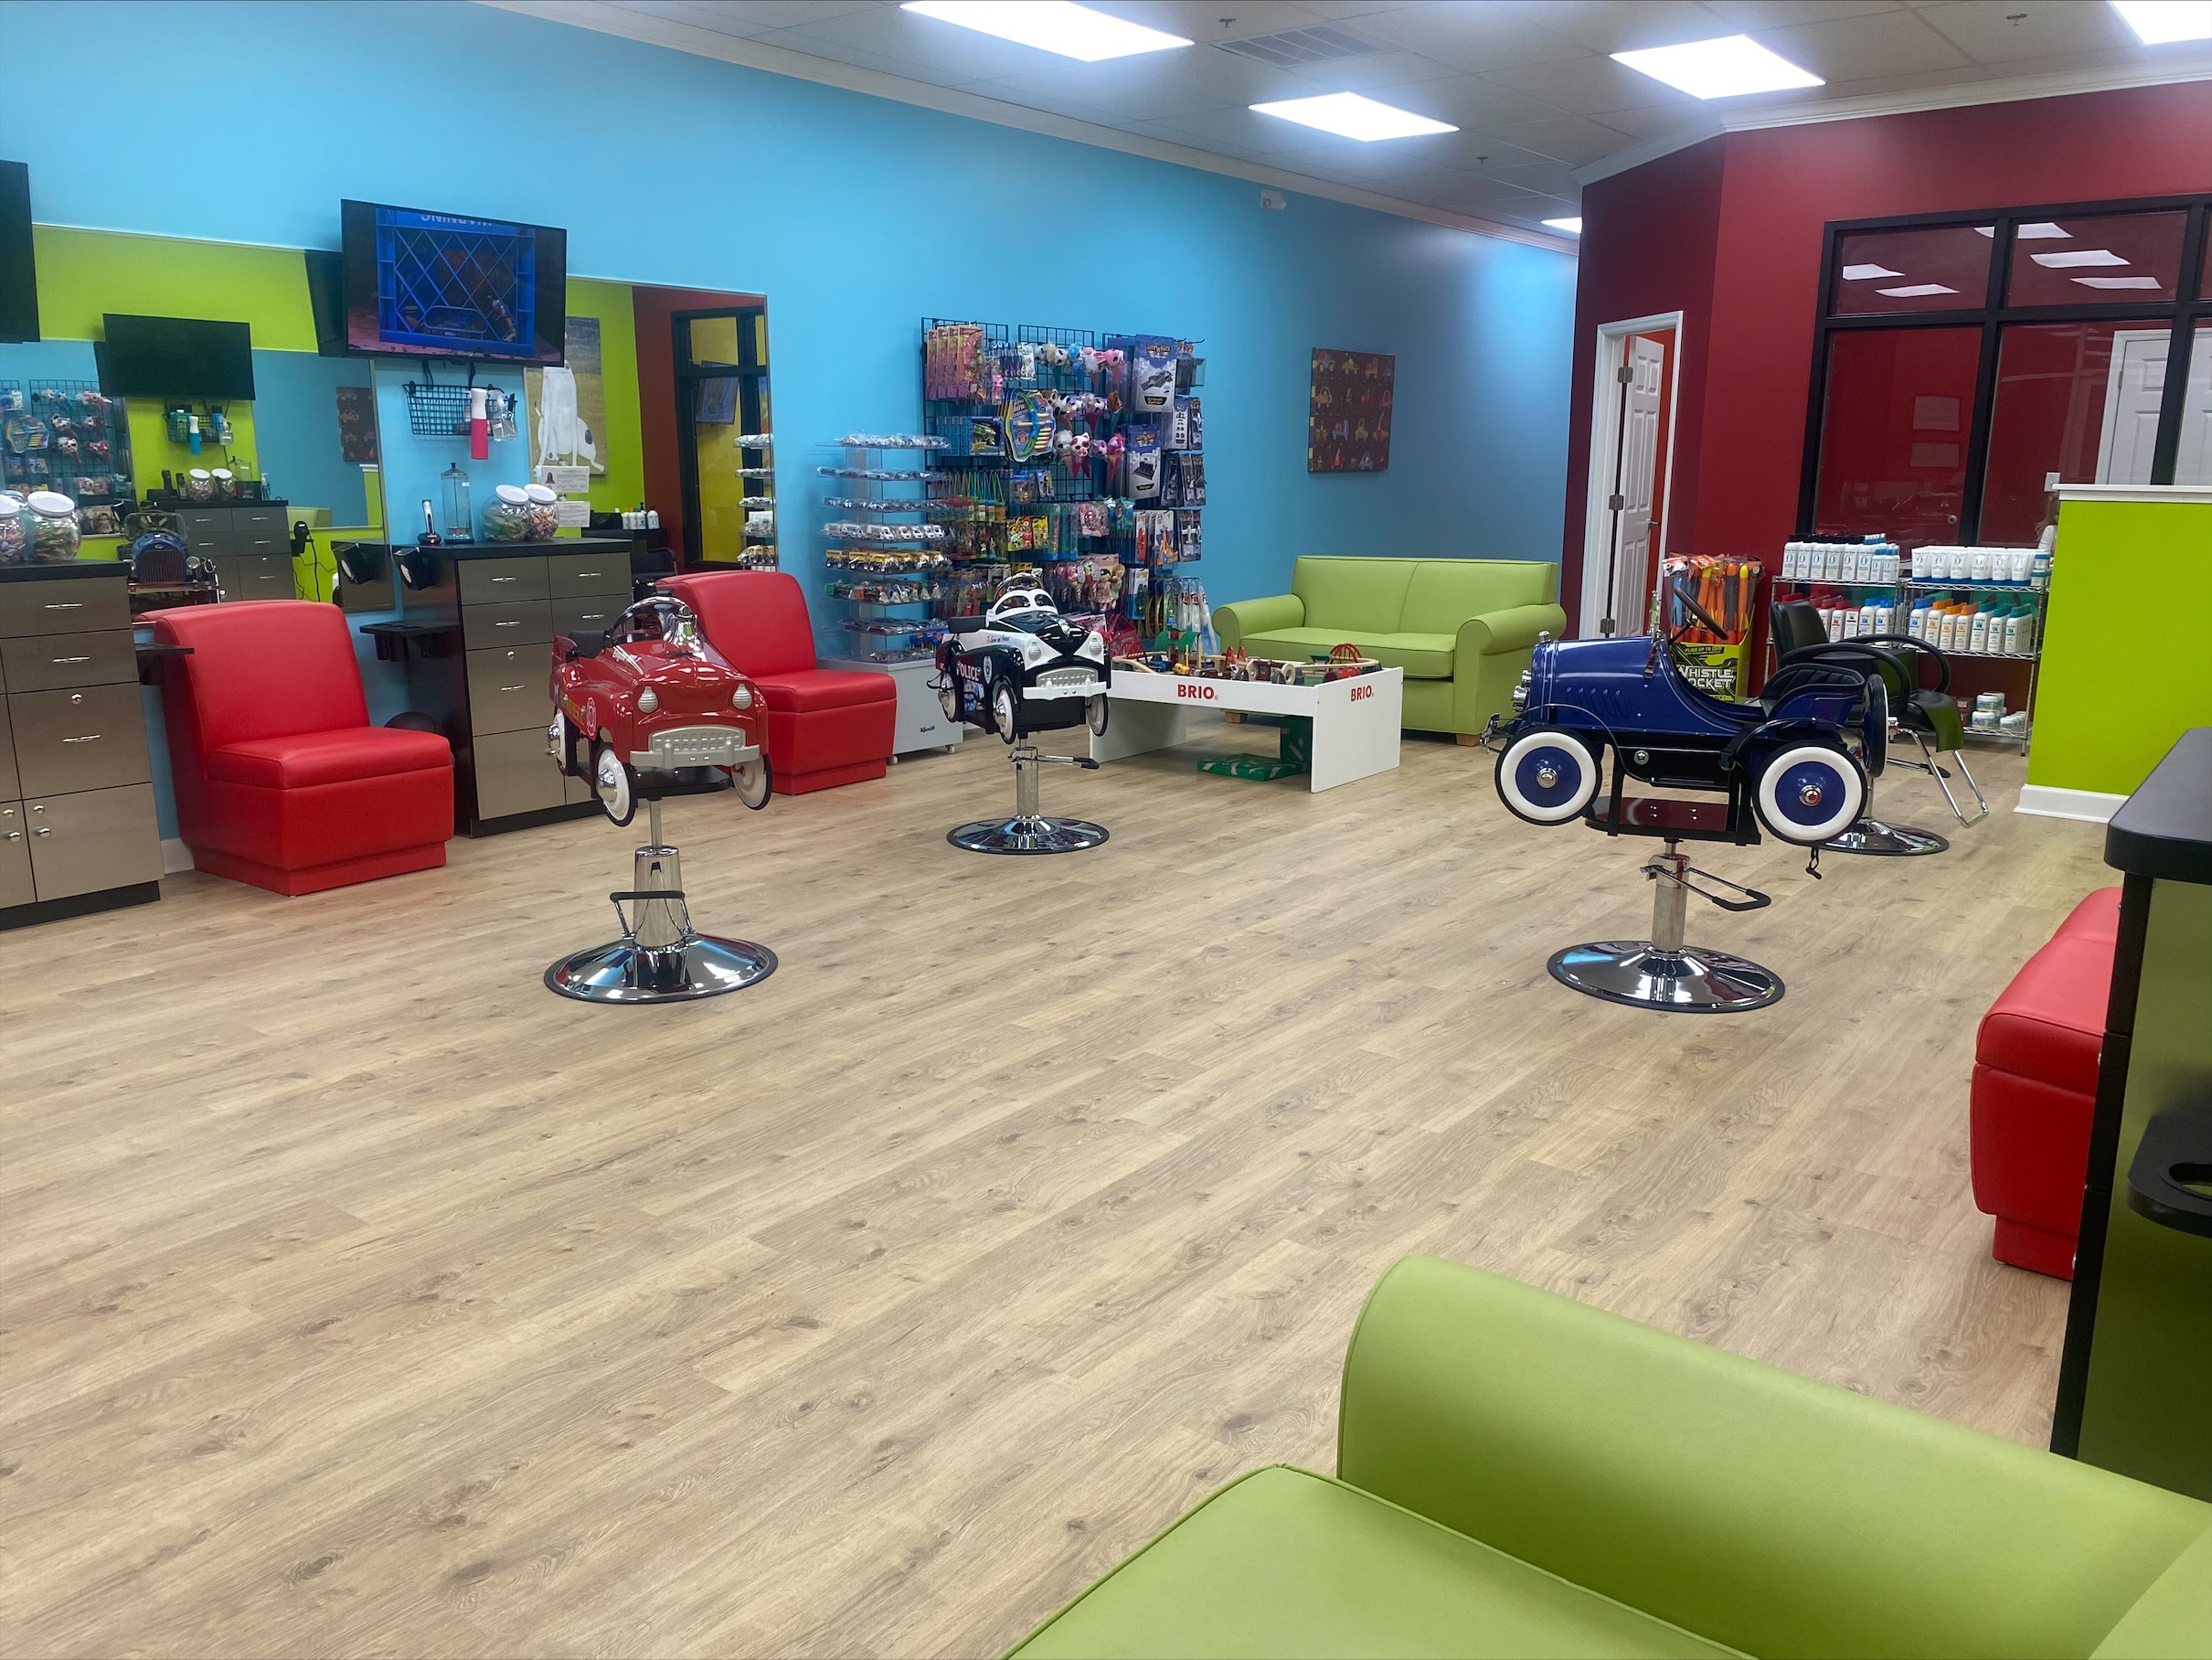 Pigtails and Crewcuts a family hair salon open in Trussville